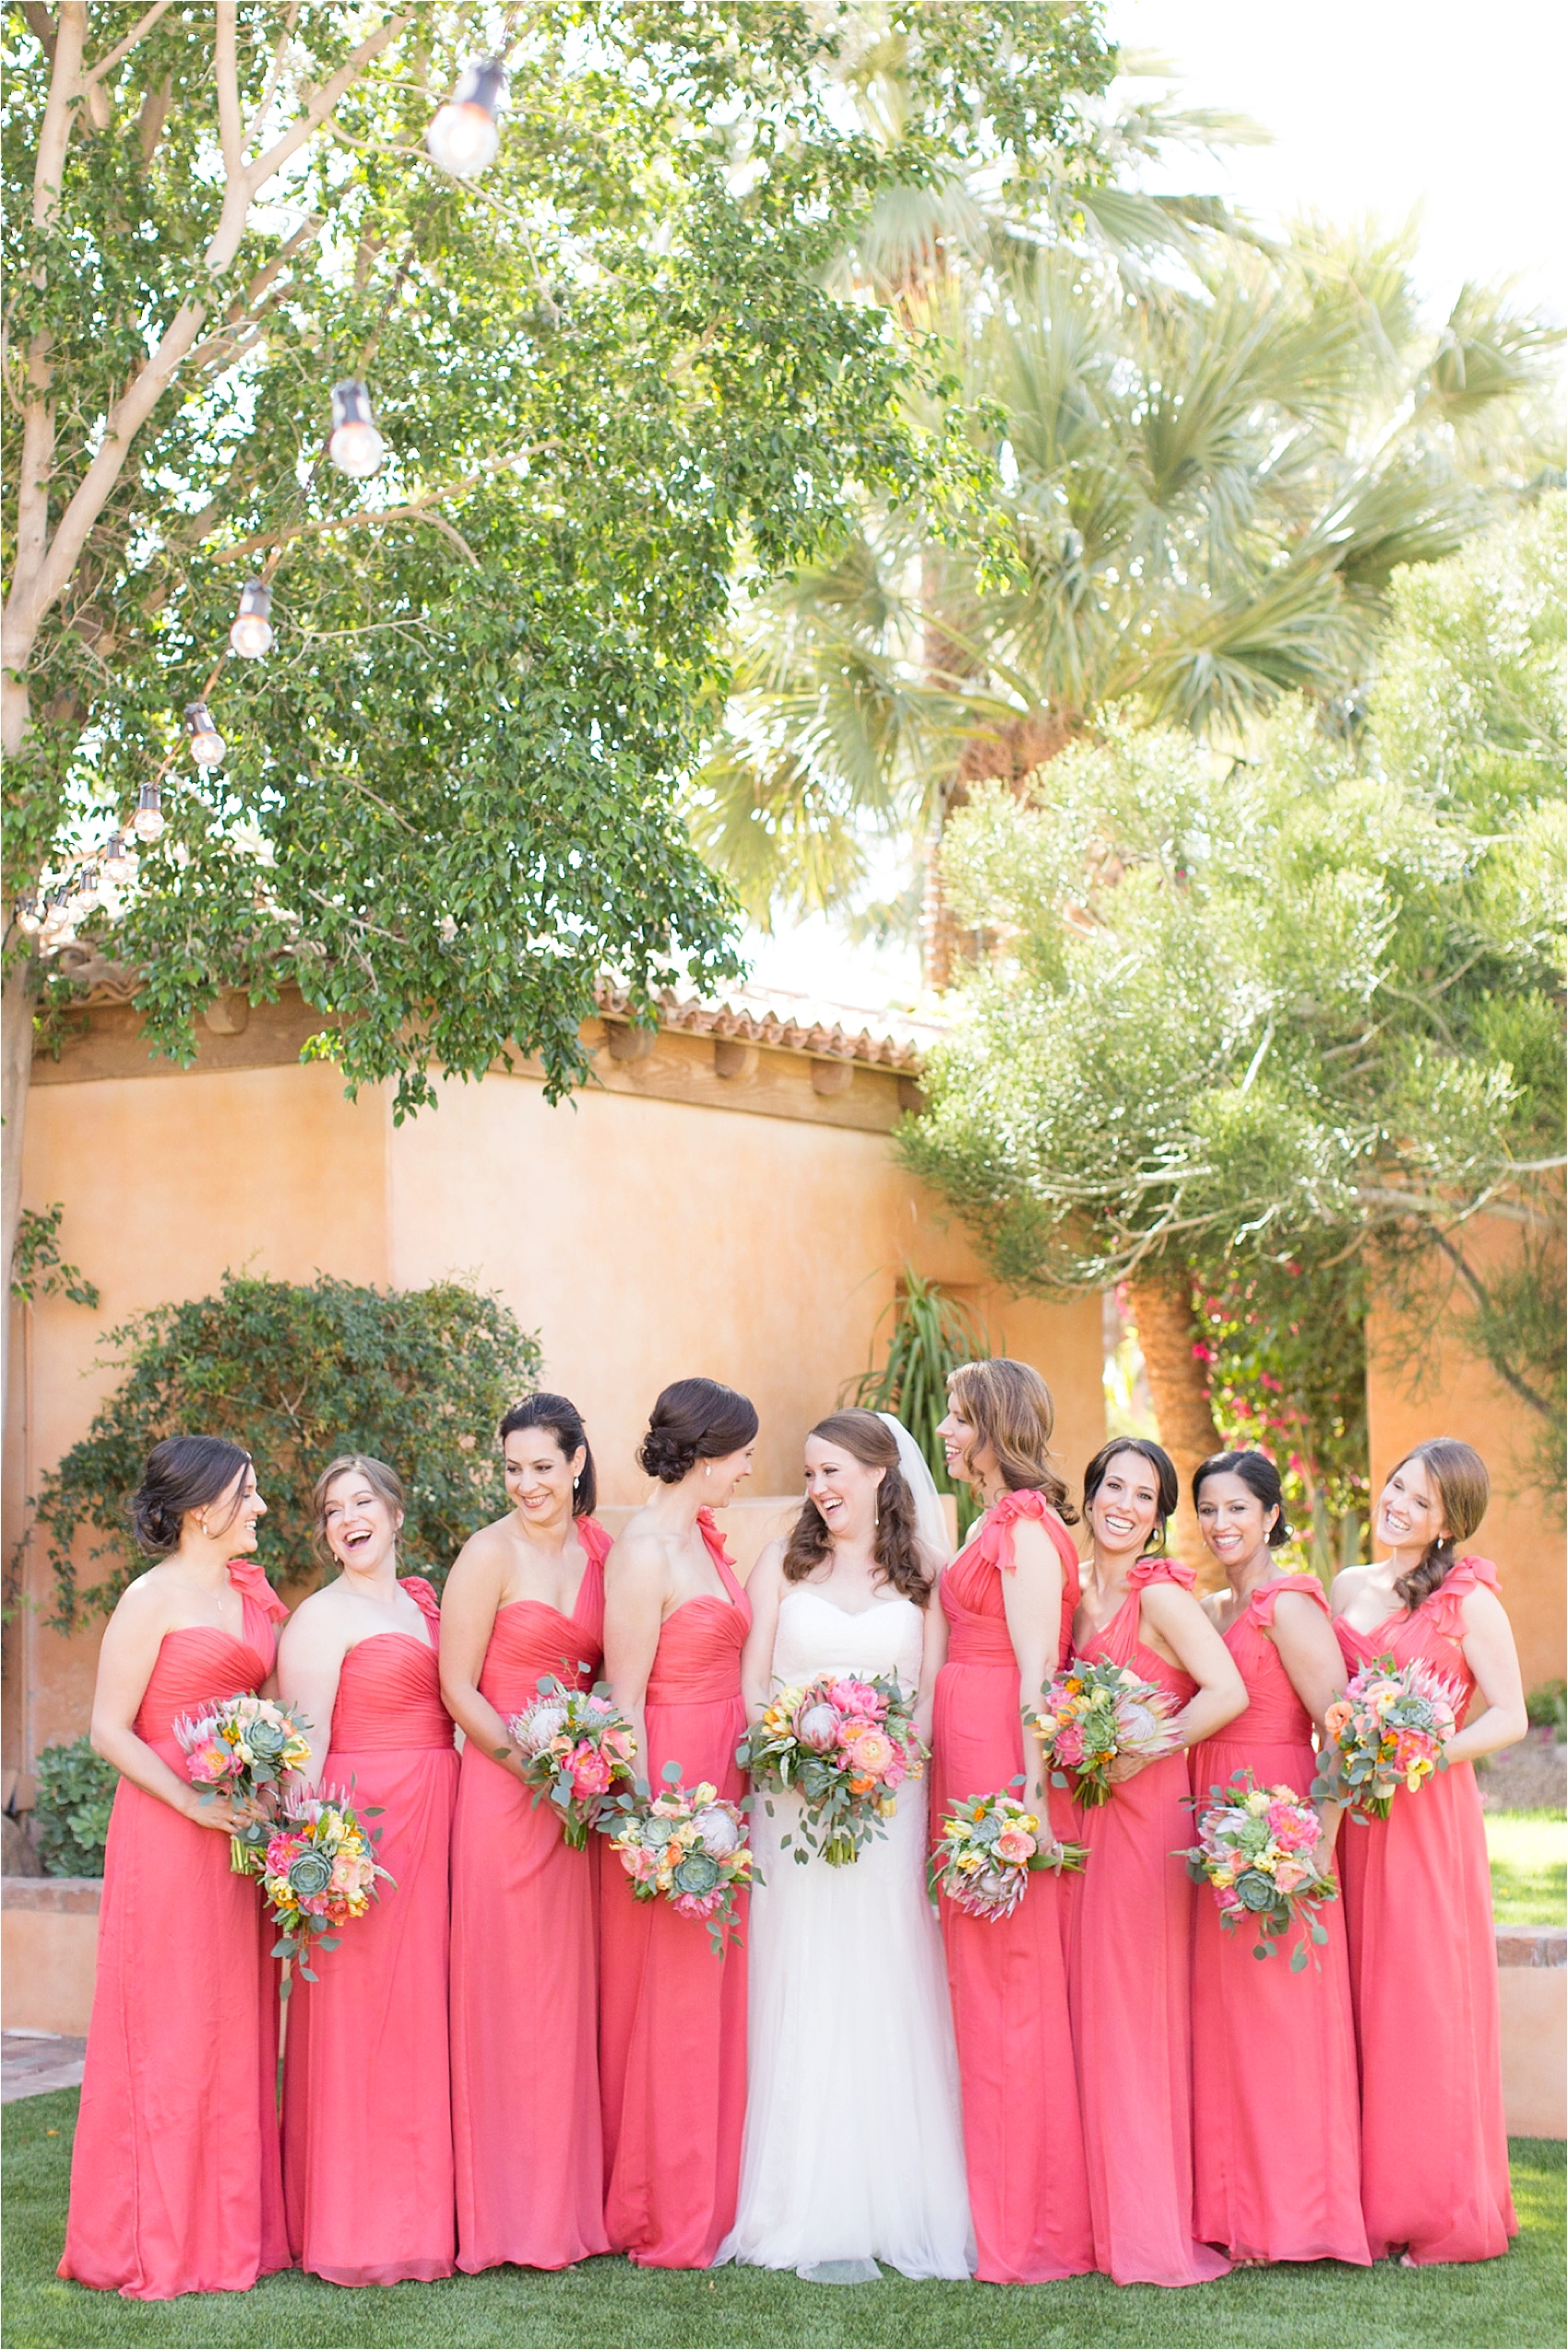 Coral Bridesmaid Dresses with Colorful Bouquets at The Royal Palms